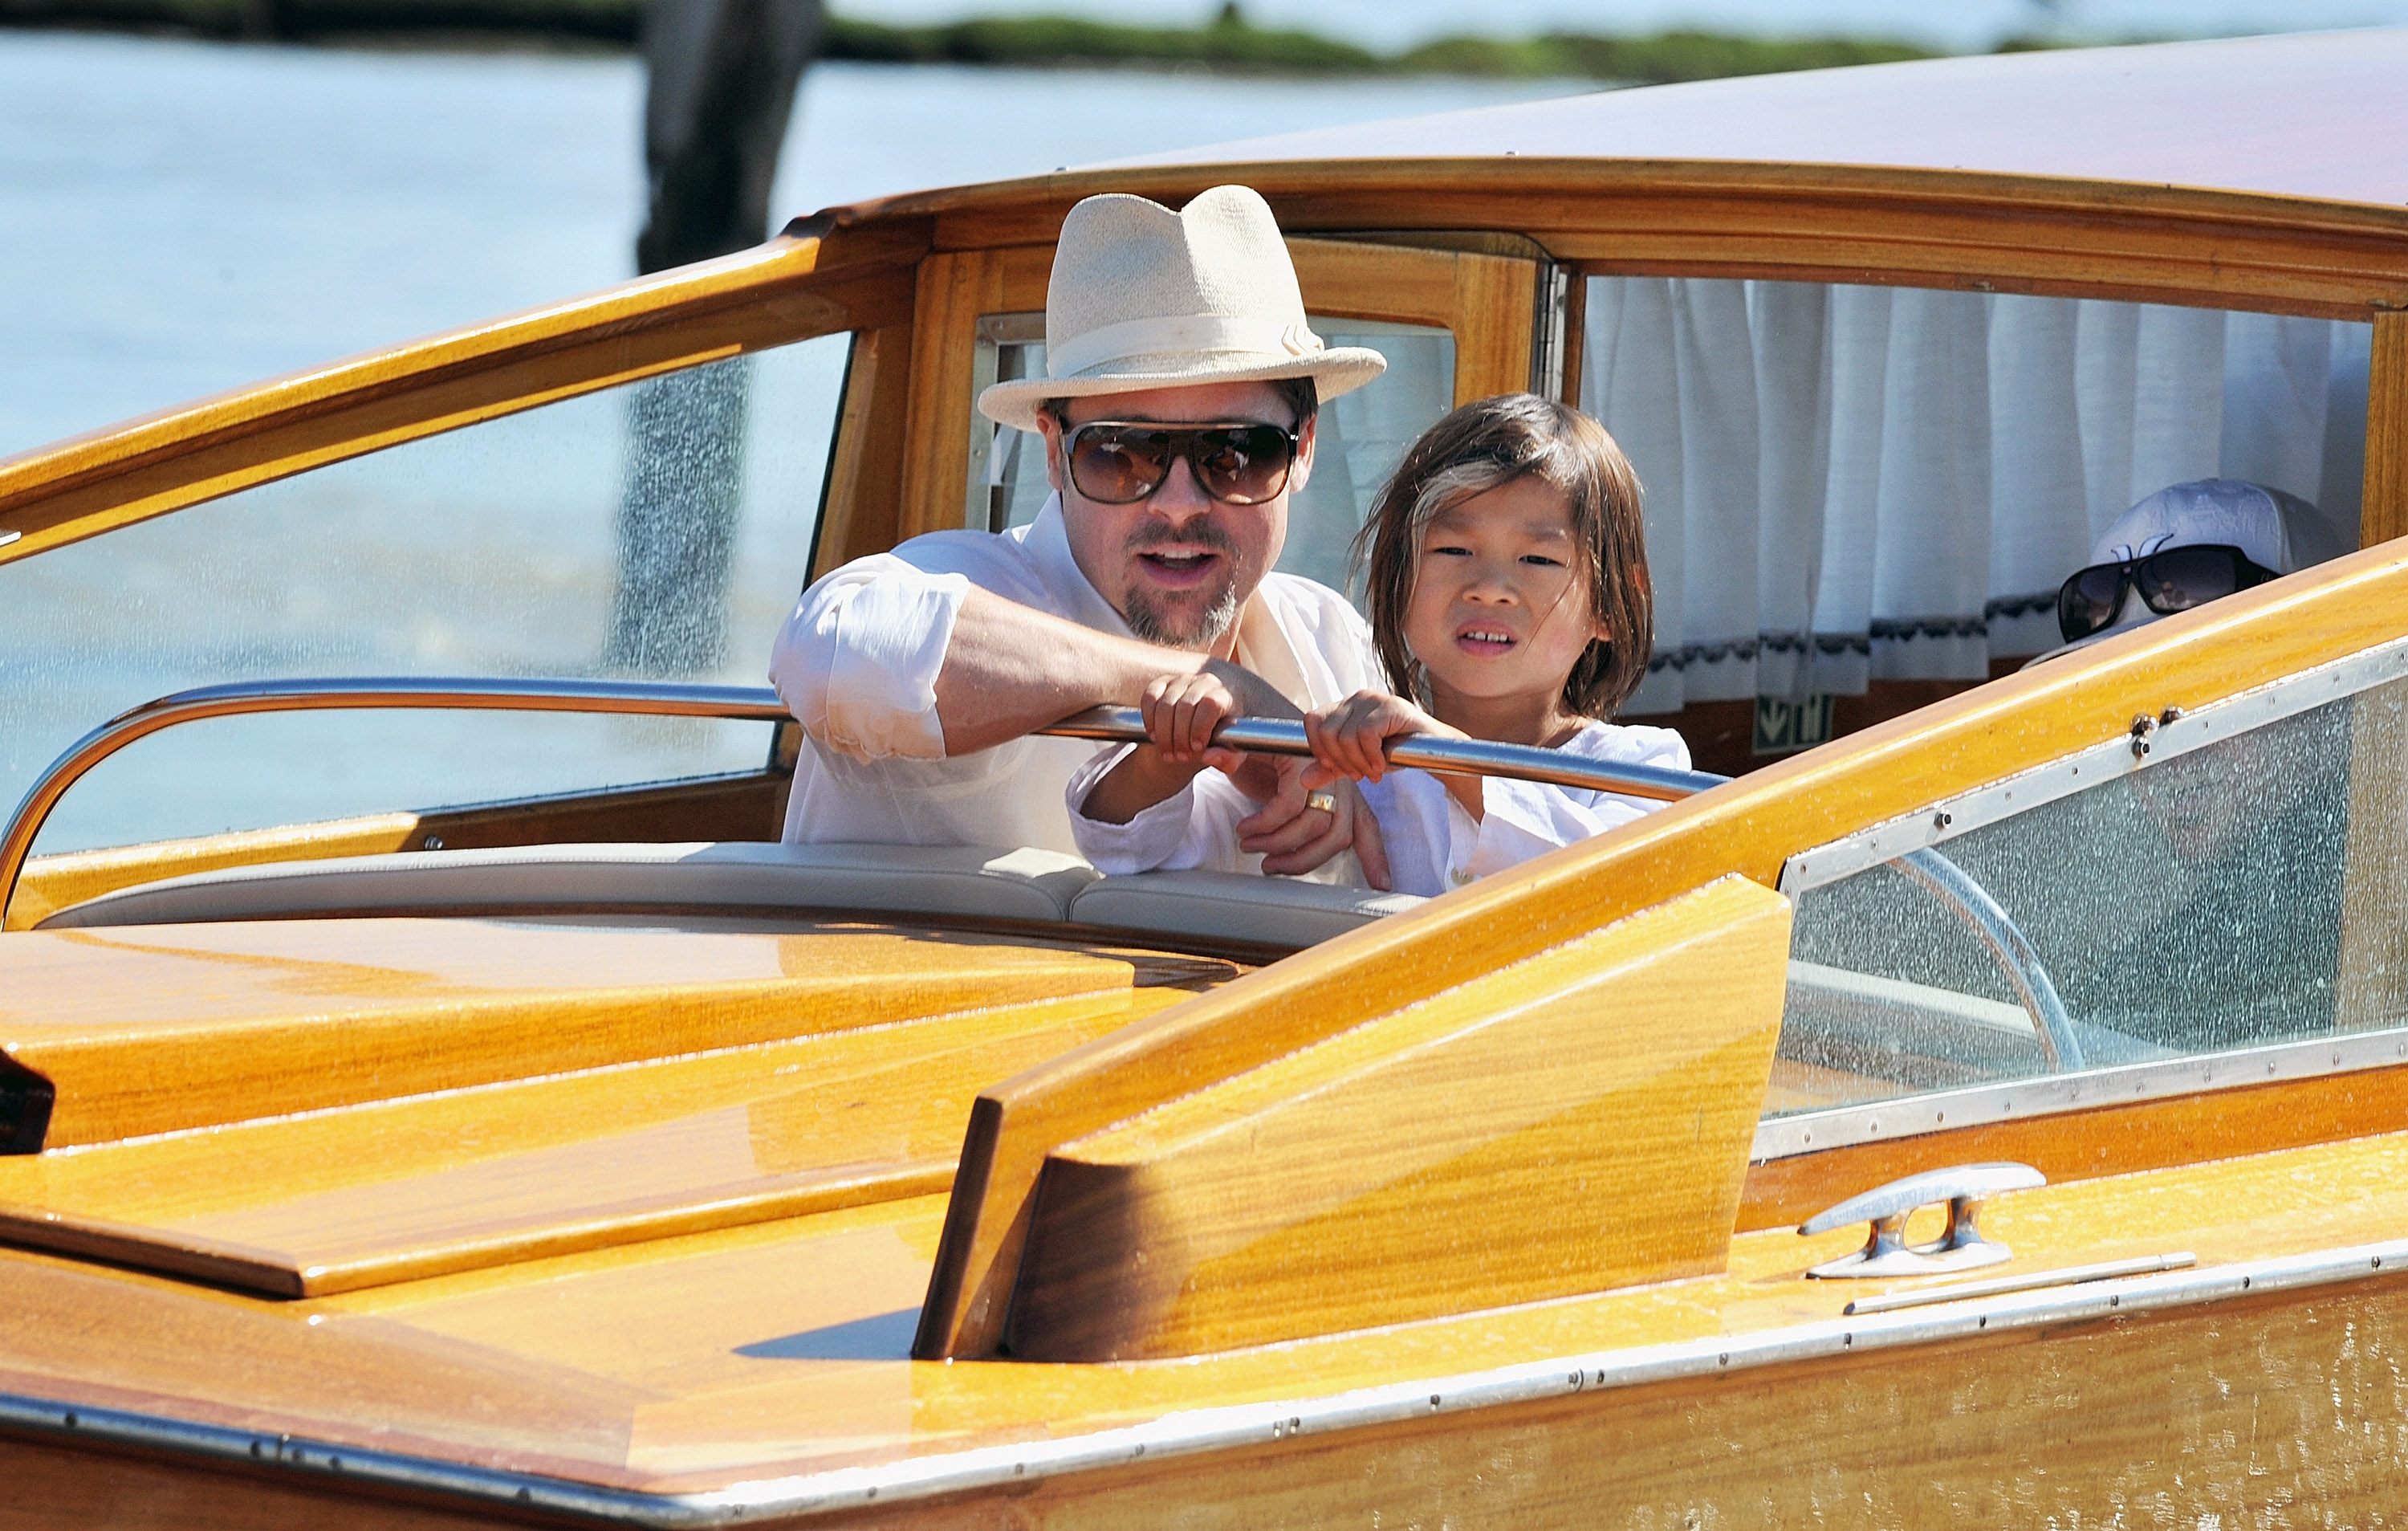 Brad Pitt and his son Pax in Venice, Italy in 2008 | Source: Getty Images